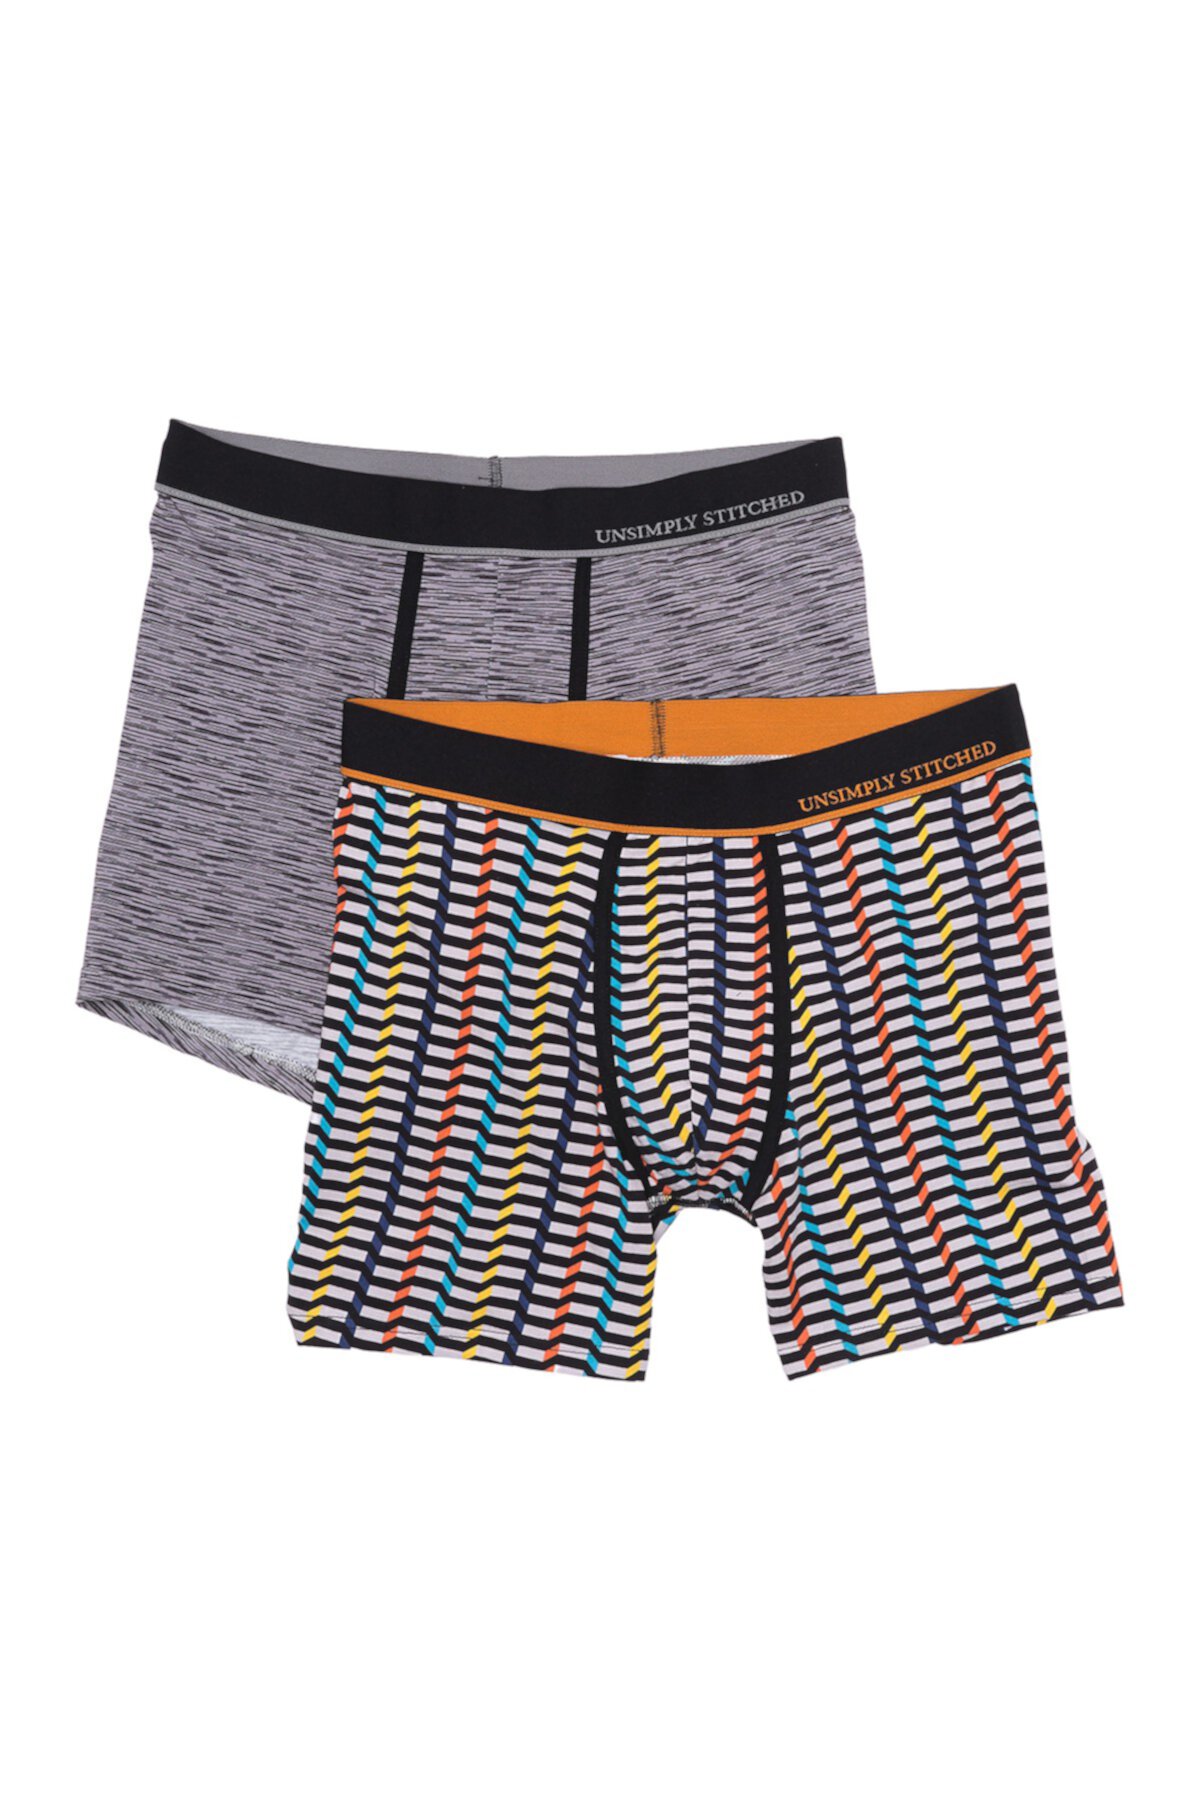 Printed Stretch Boxer Brief - Pack of 2 Unsimply Stitched